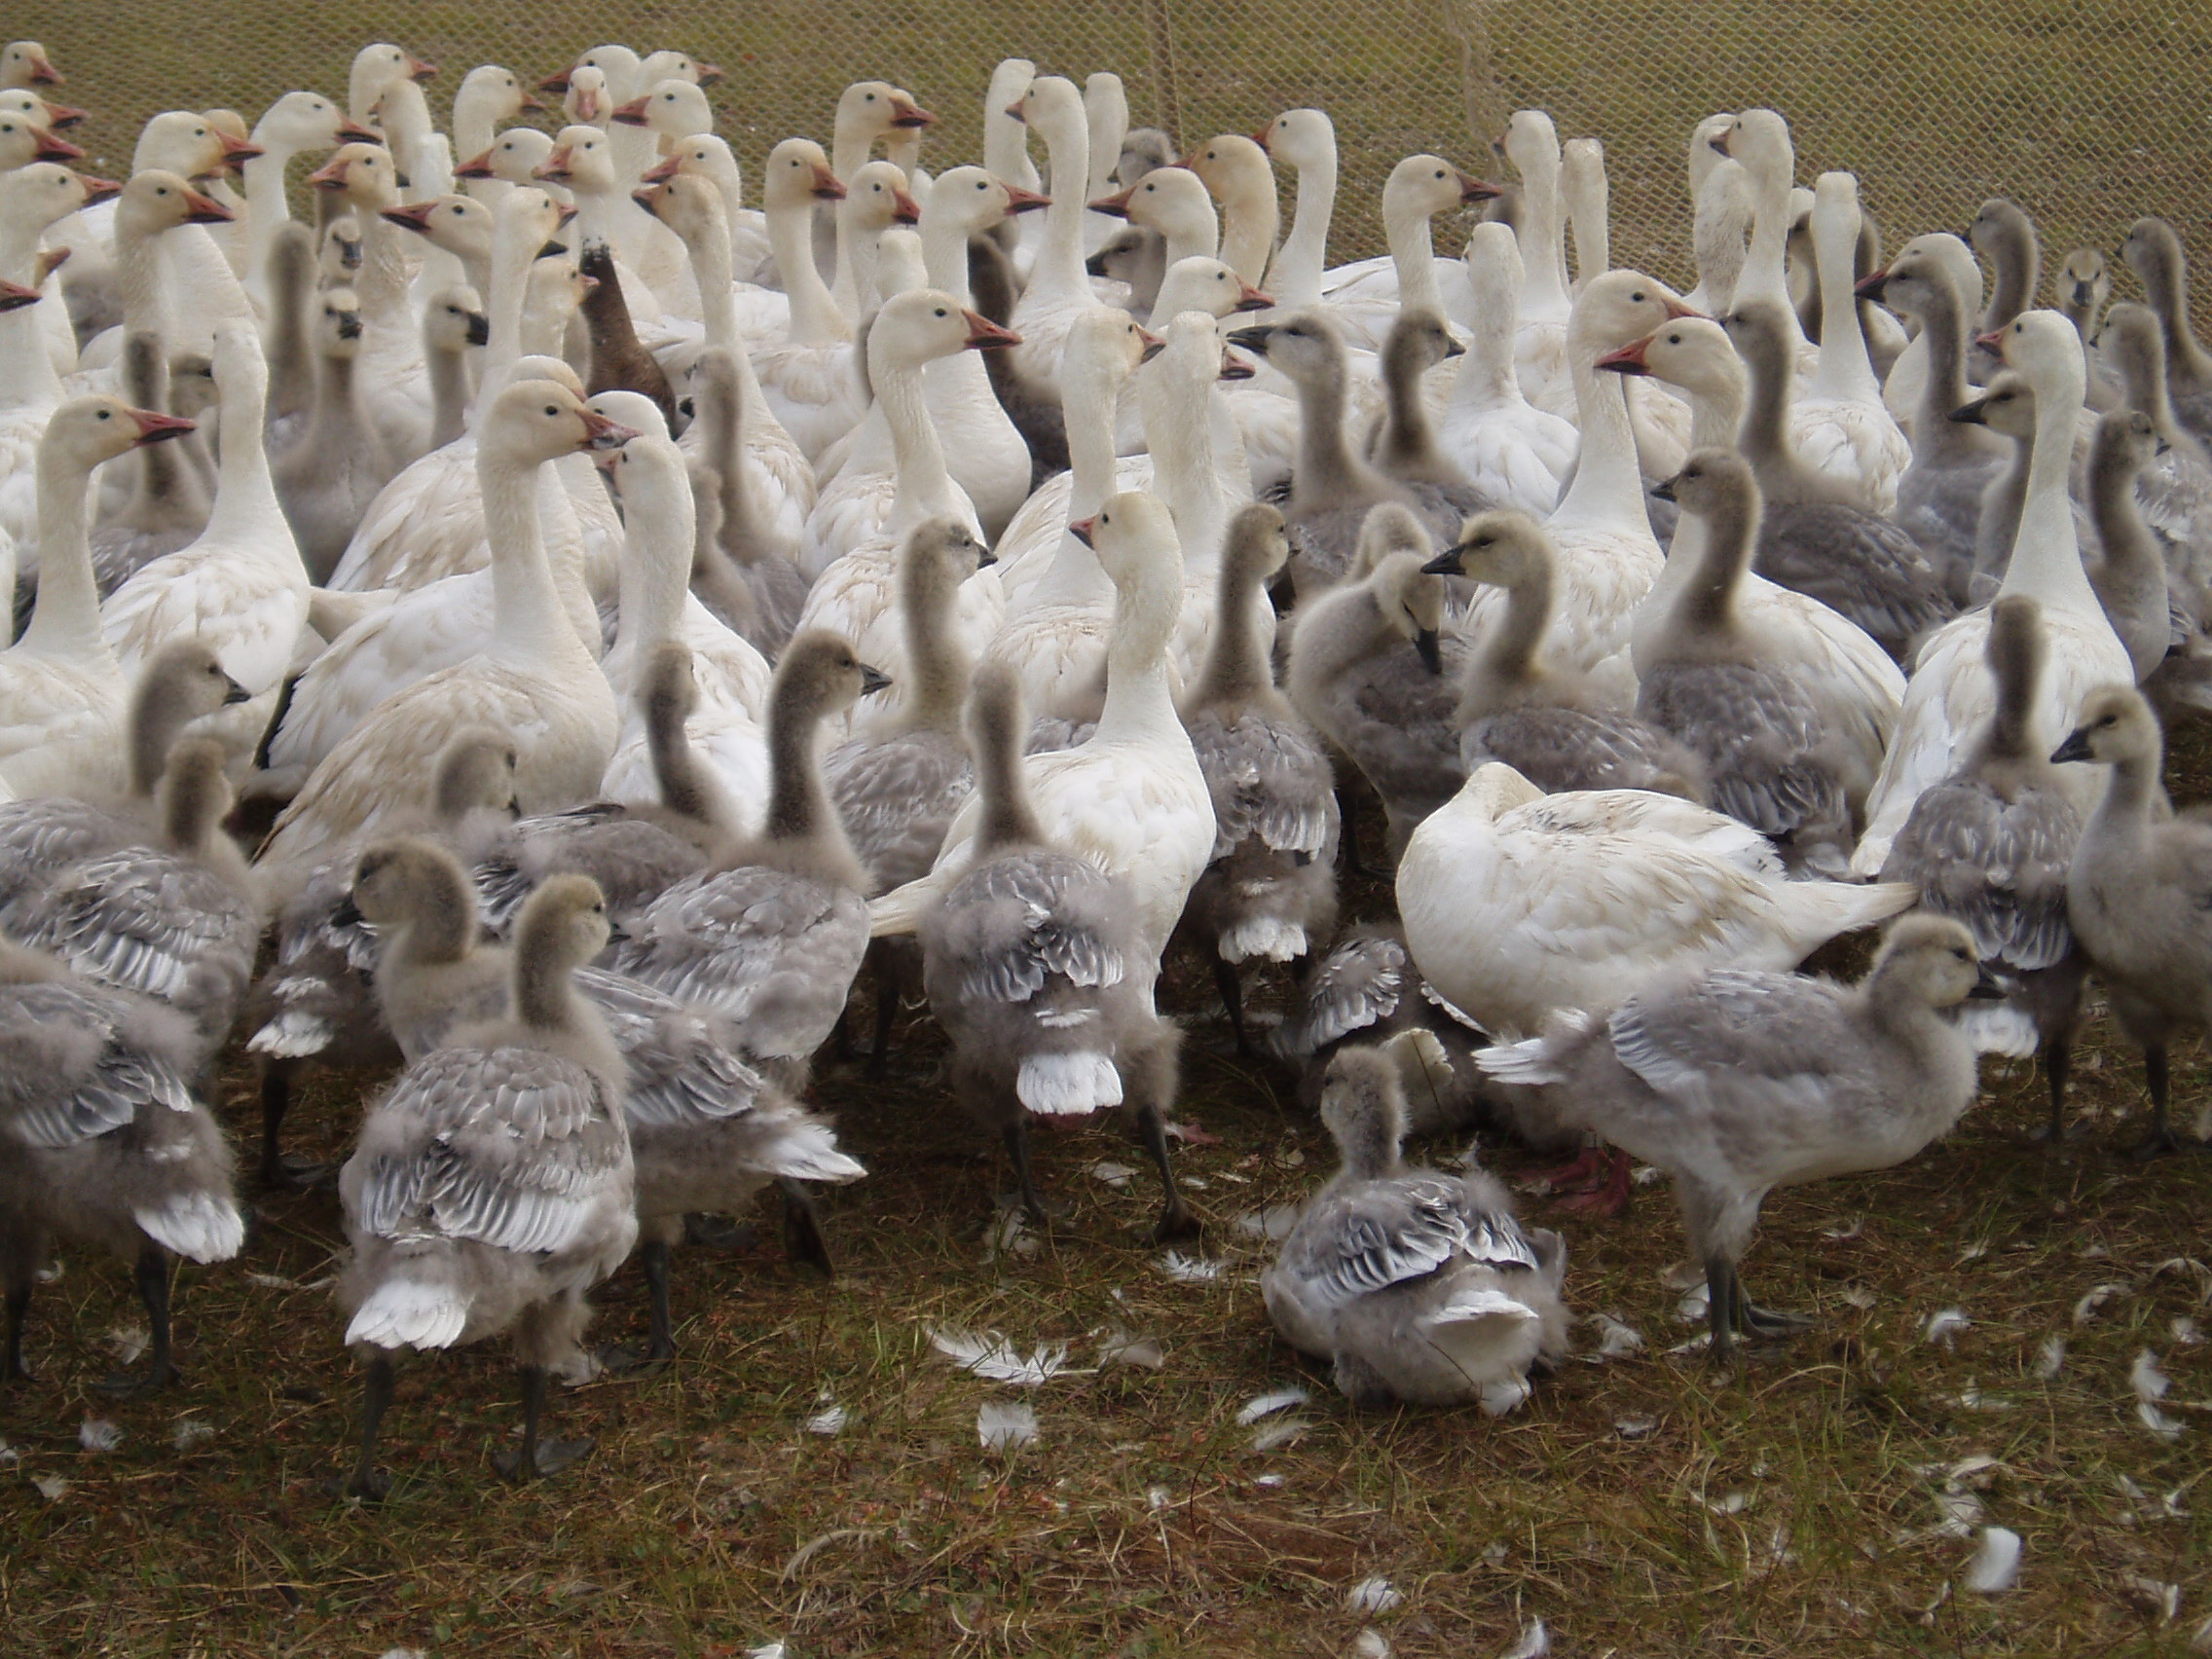 Snow geese at Barrow nesting area (Photo courtesy of ABR Inc.)